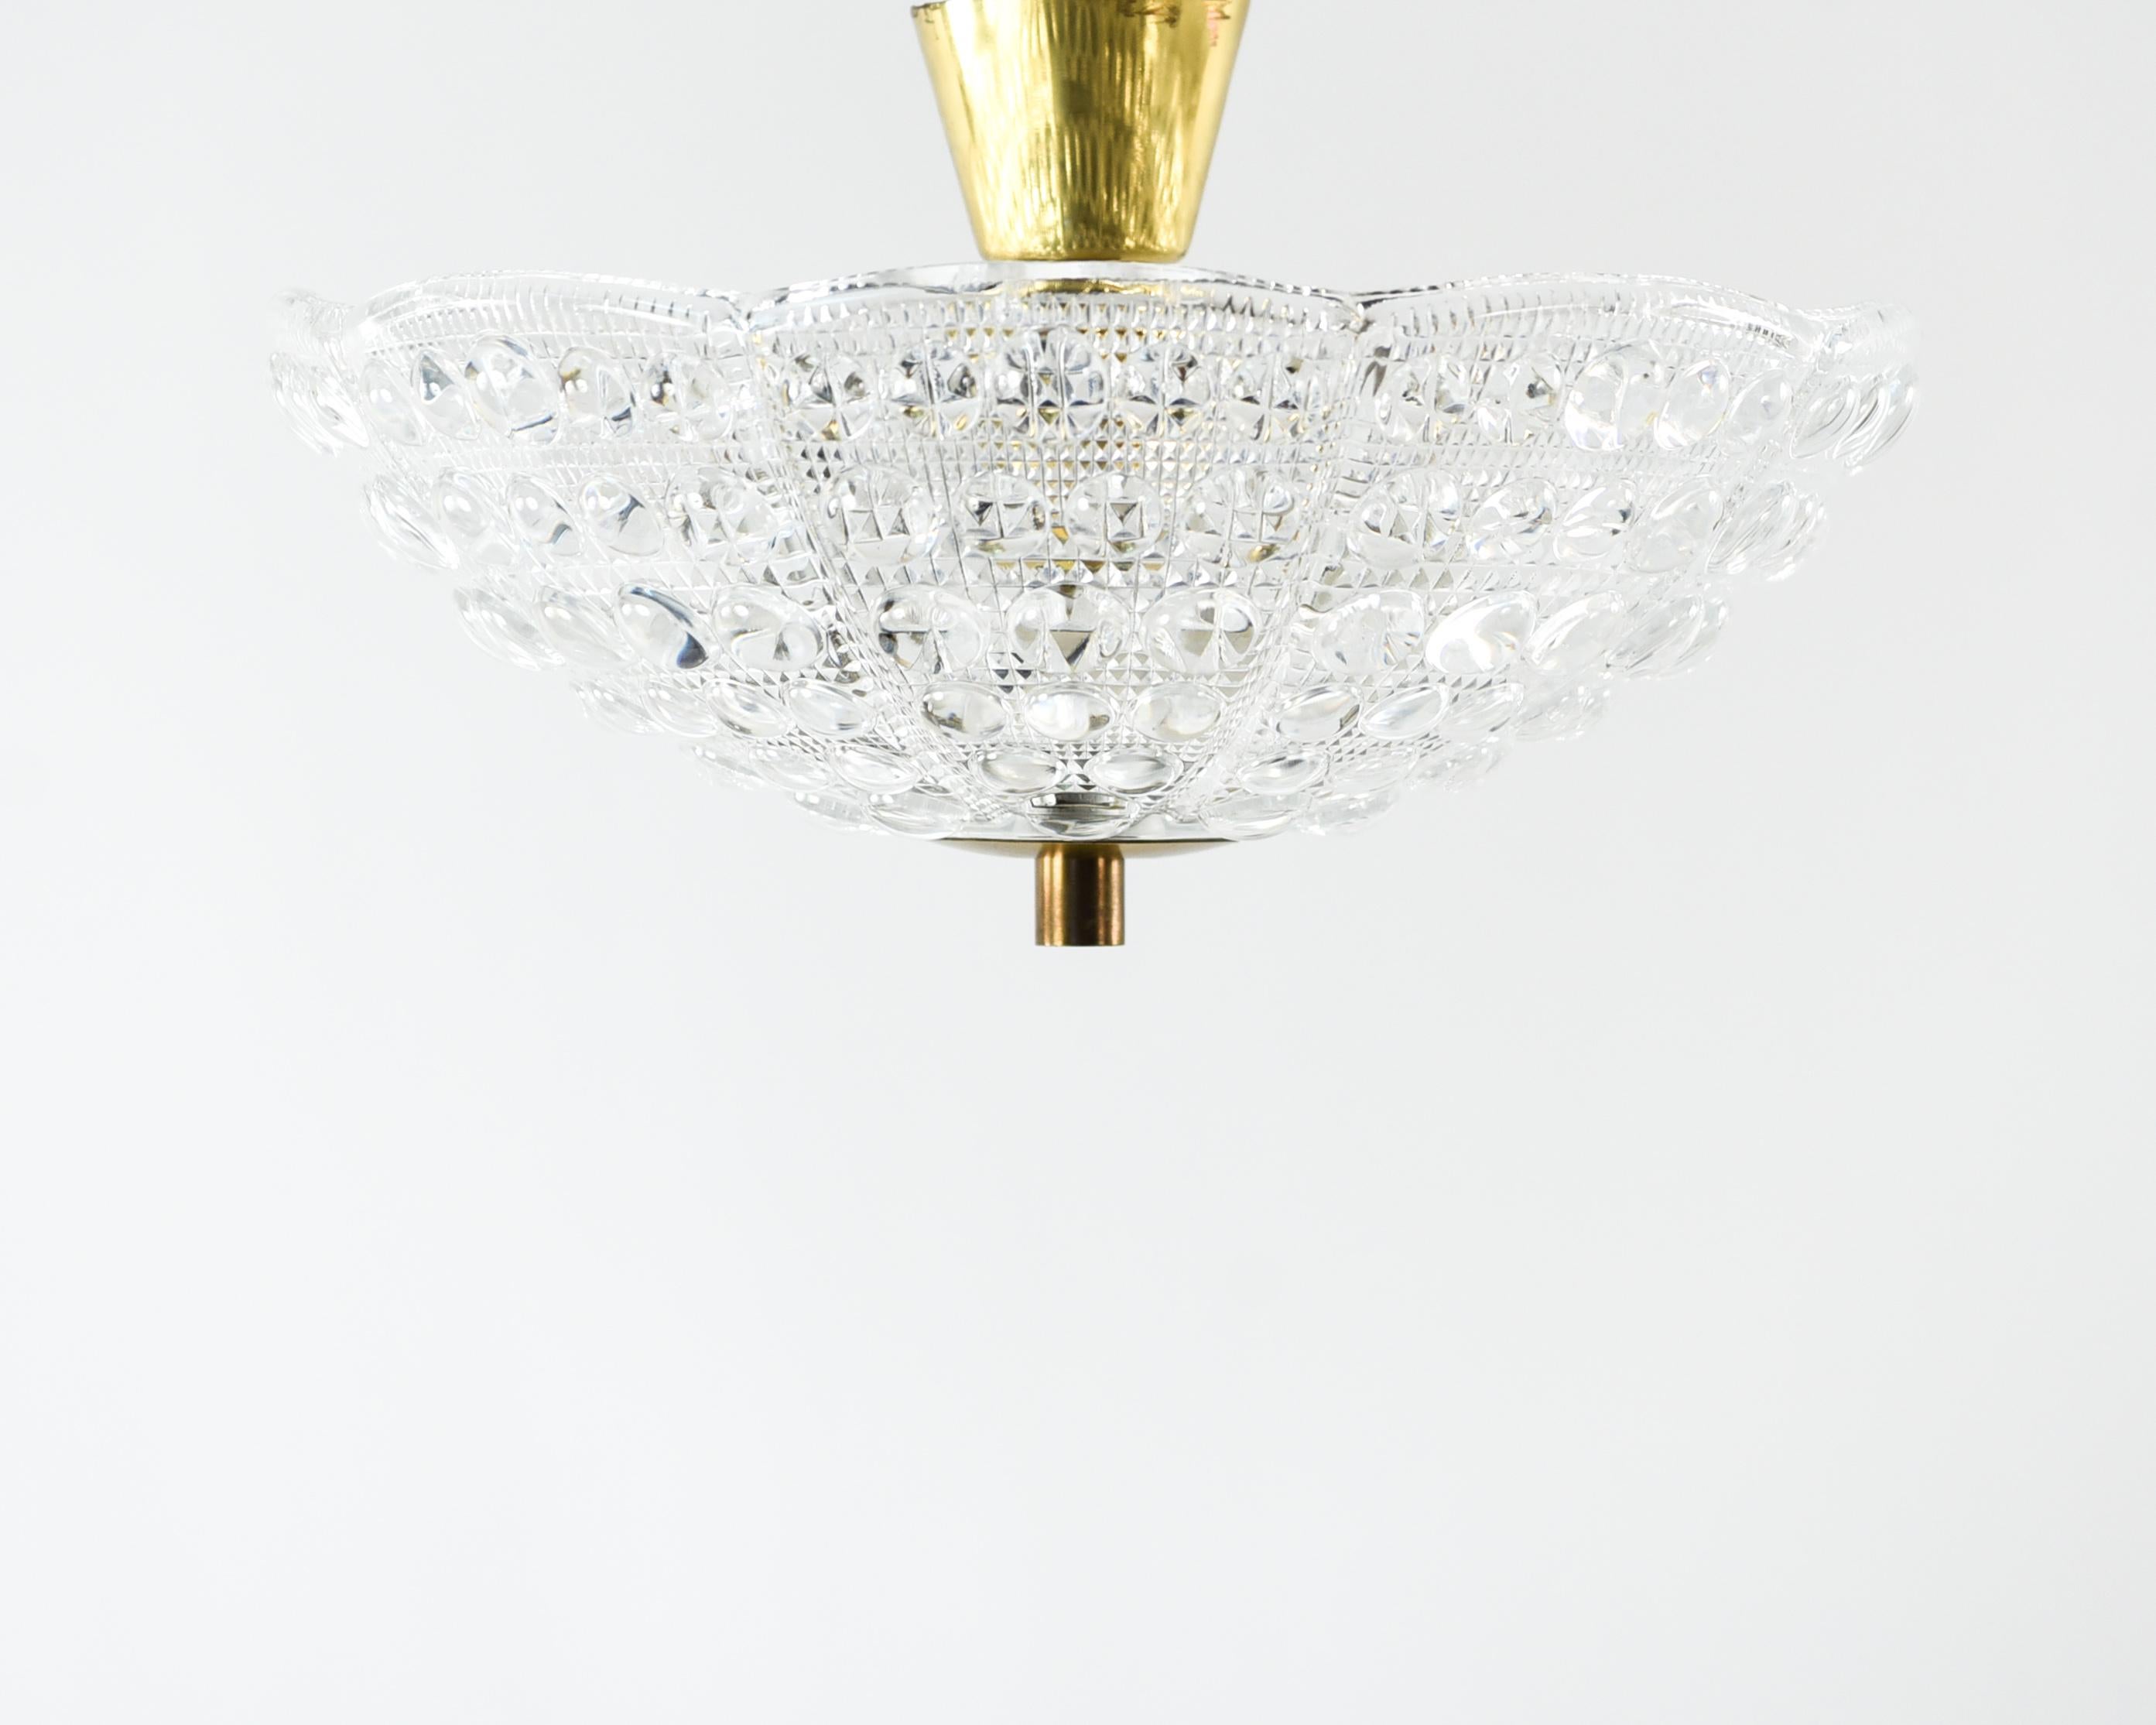 This pendant chandelier was designed by Carl Fagerlund and produced by Orrefors, circa 1960s. This elegant piece features textured crystal in a rounded, shallow conical form with brass hardware and accents.